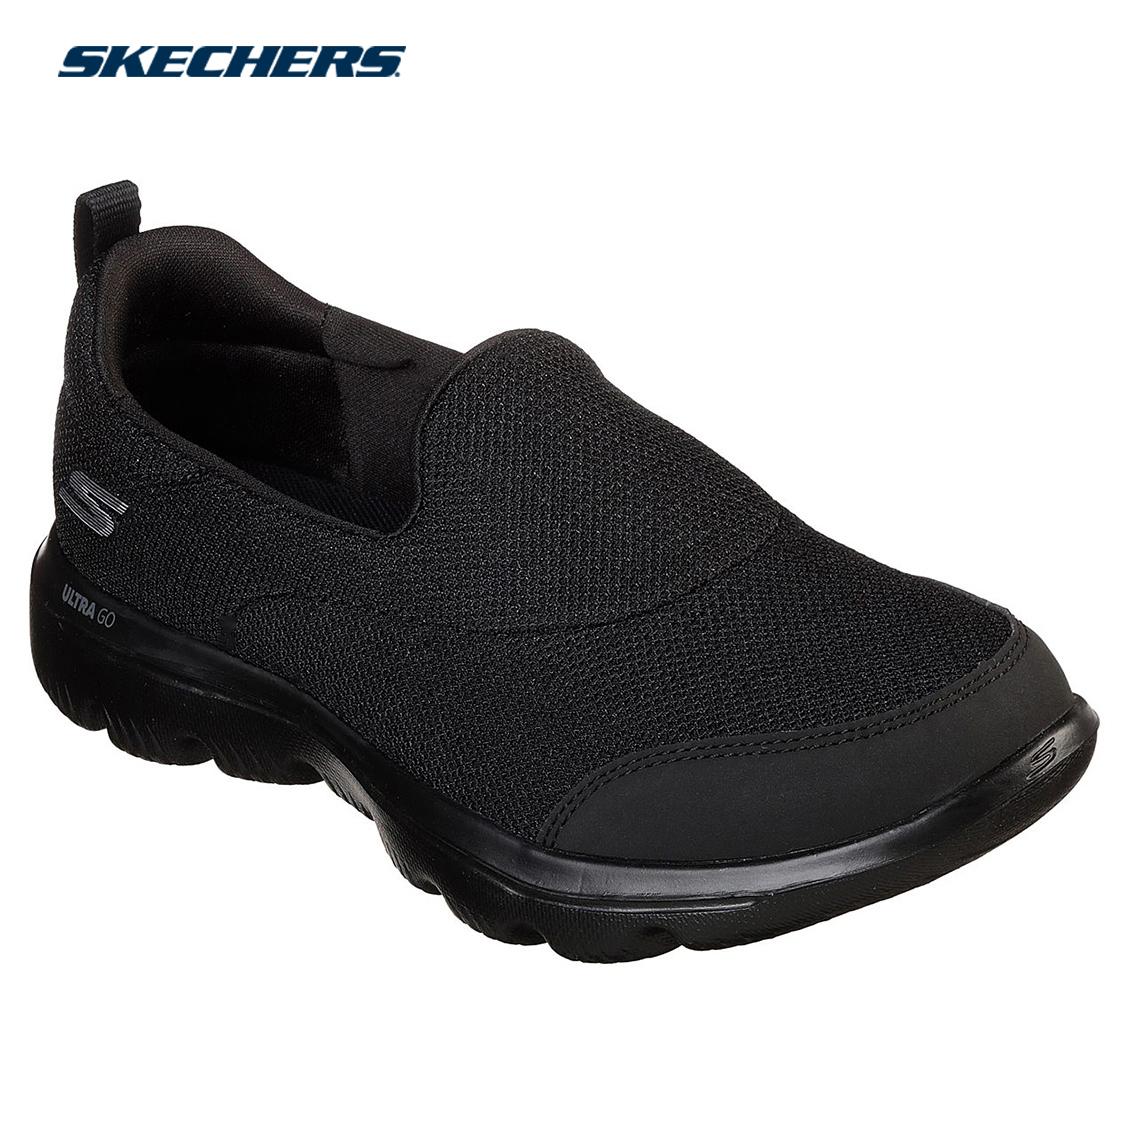 skechers black shoes philippines off 76 